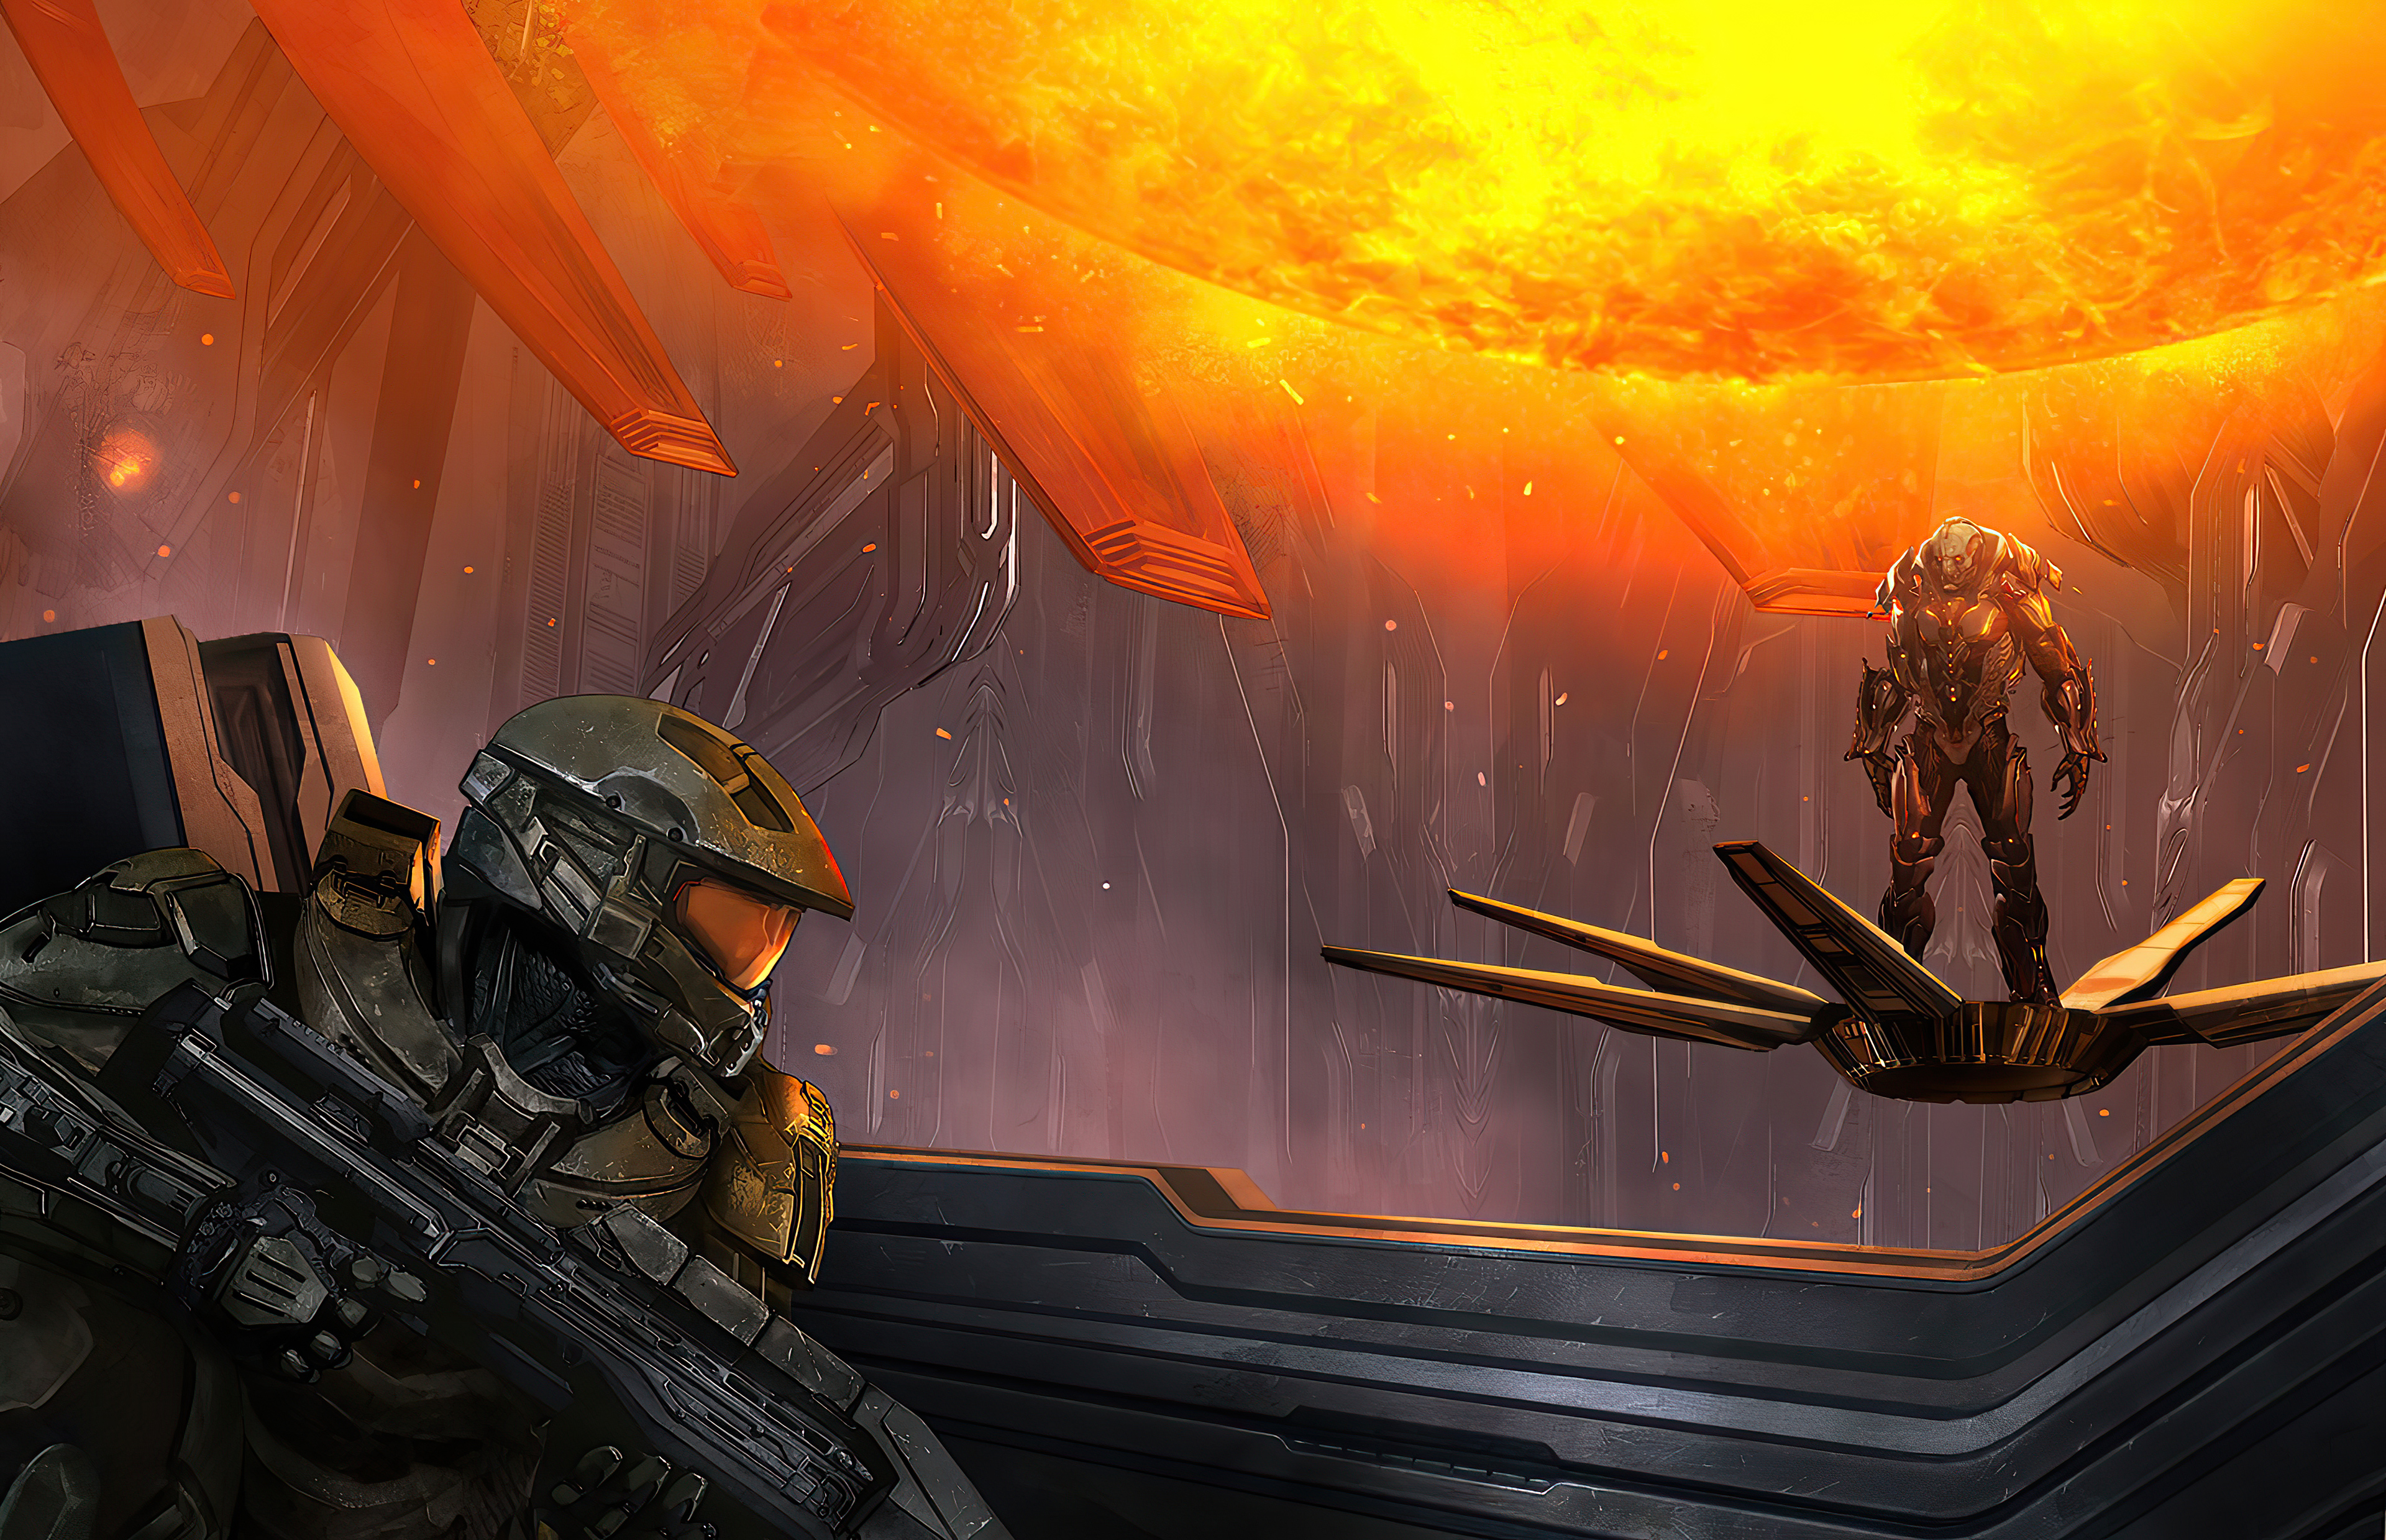 Halo 4 Wallpaper by Corydbhs15 on DeviantArt